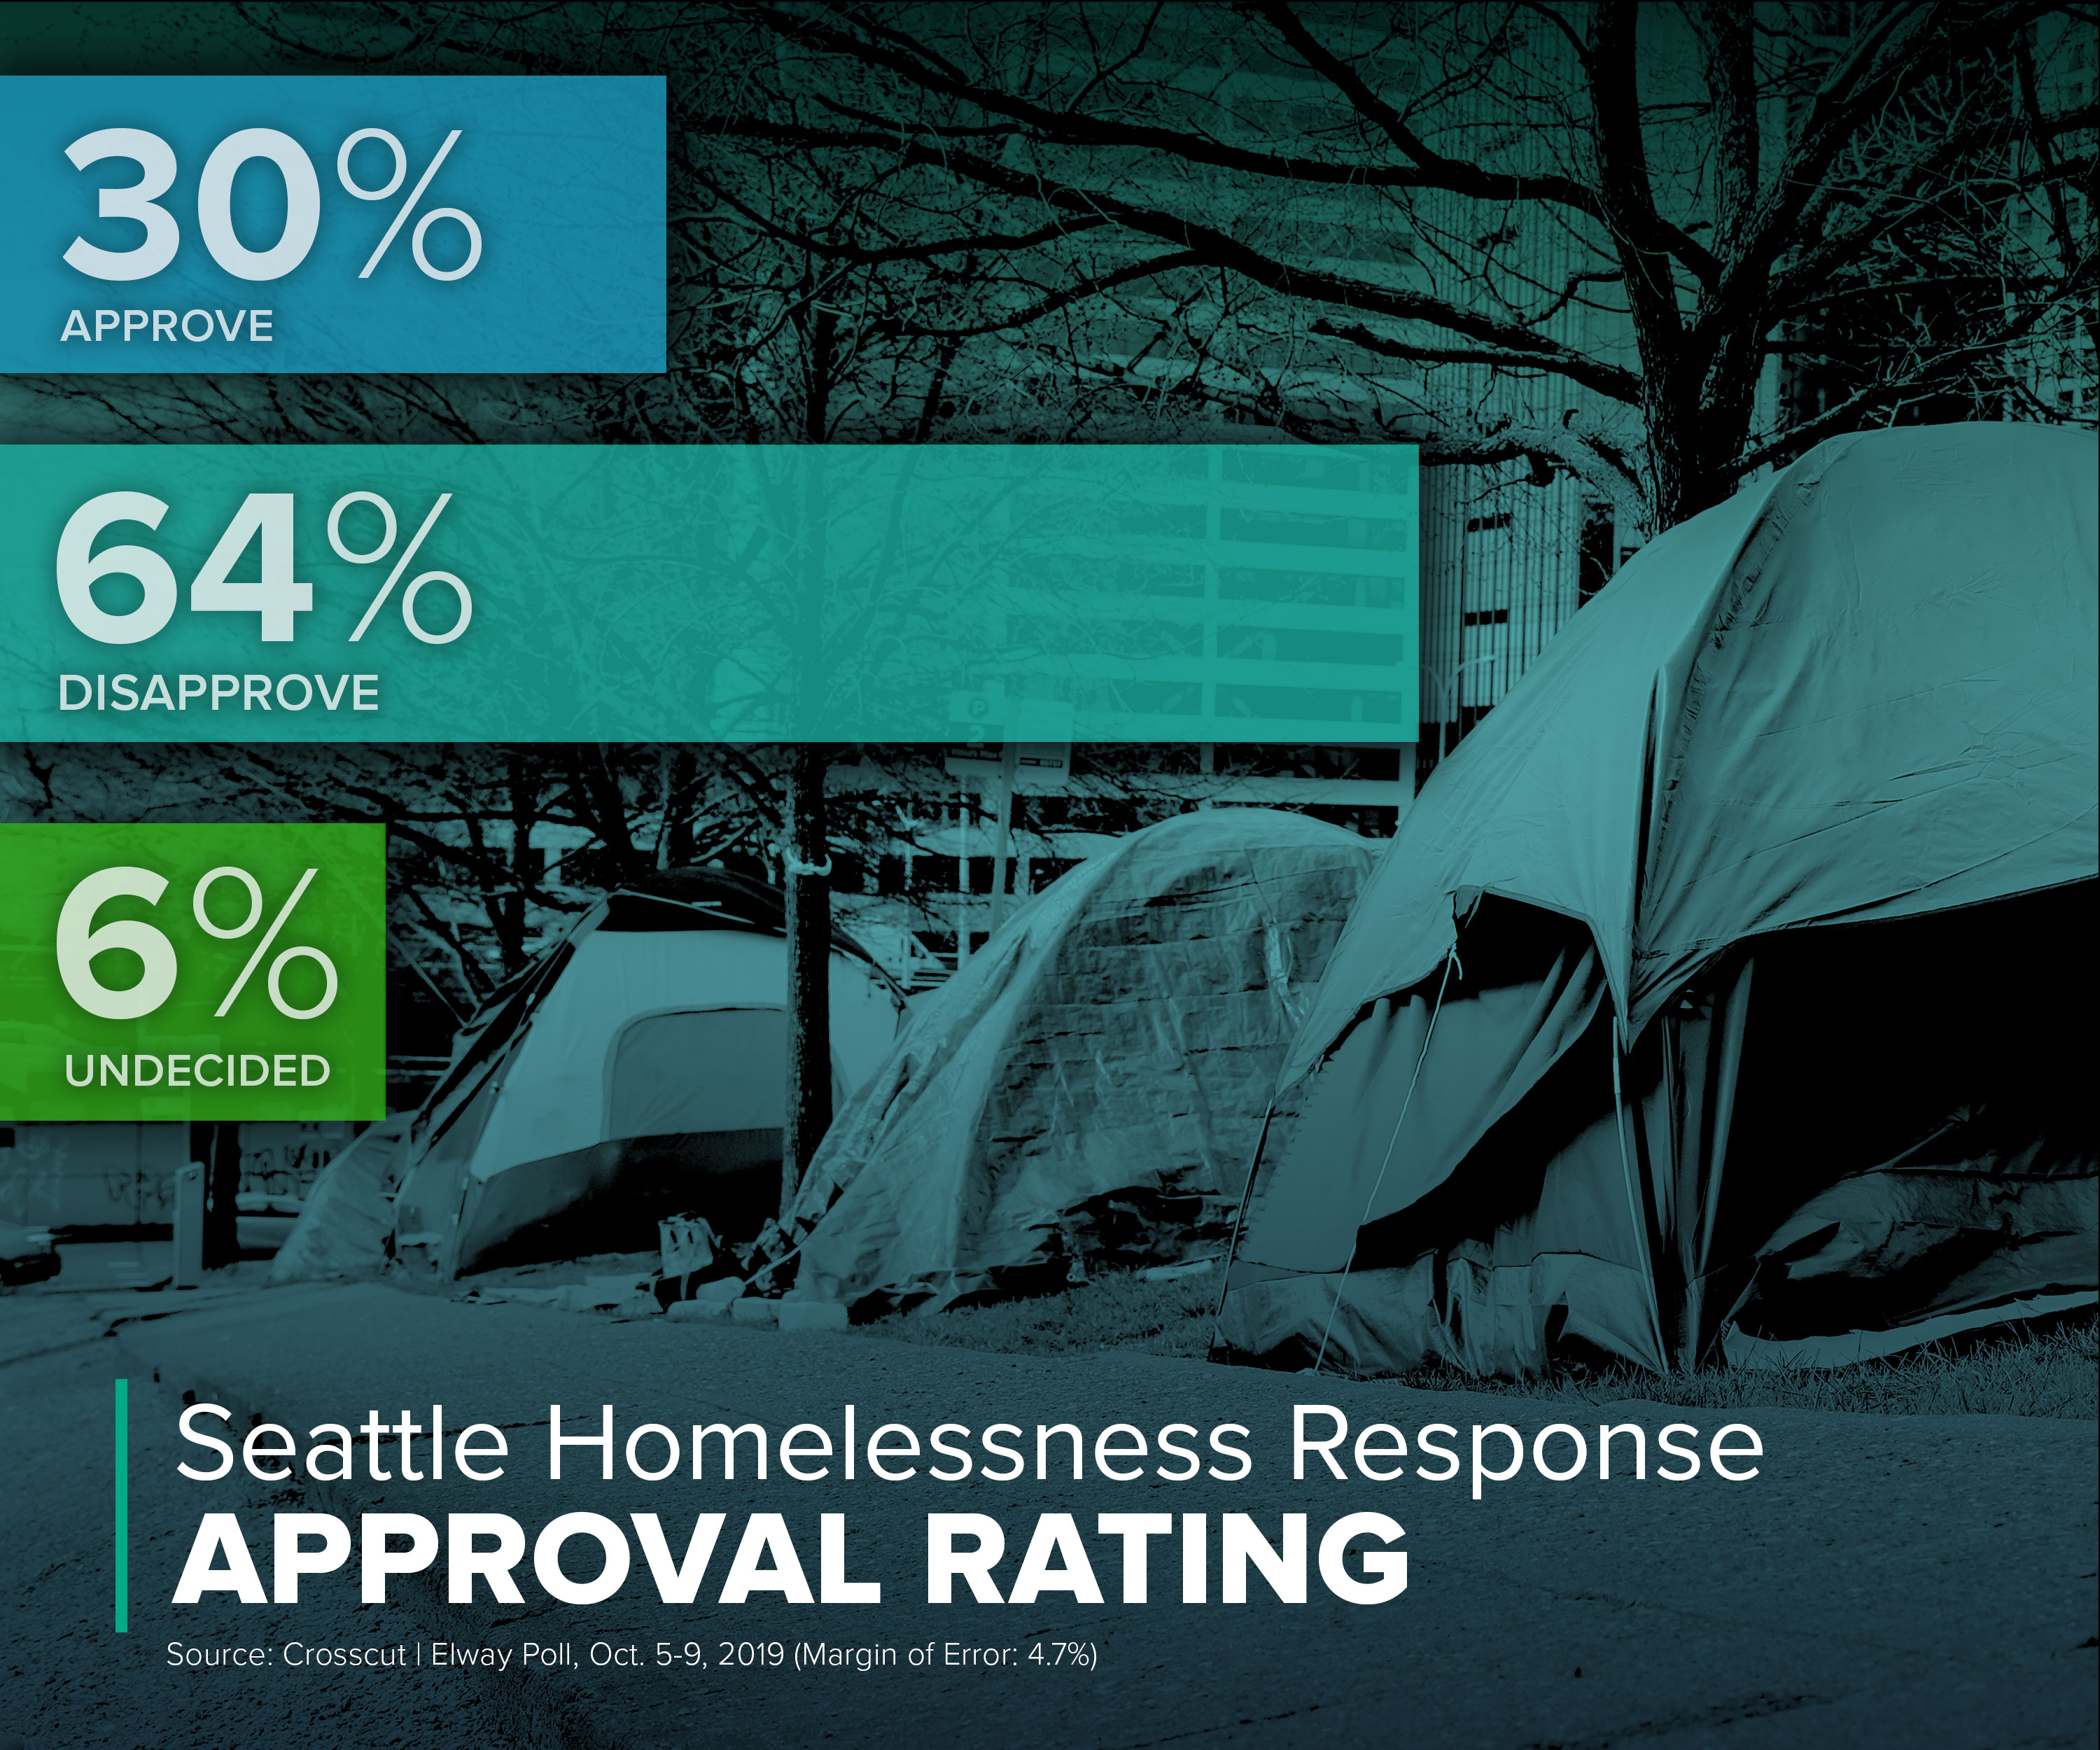 Poll results showing approval rating for the city’s homelessness response. 30 percent say they approve, 64 disapprove and 6 percent are undecided.